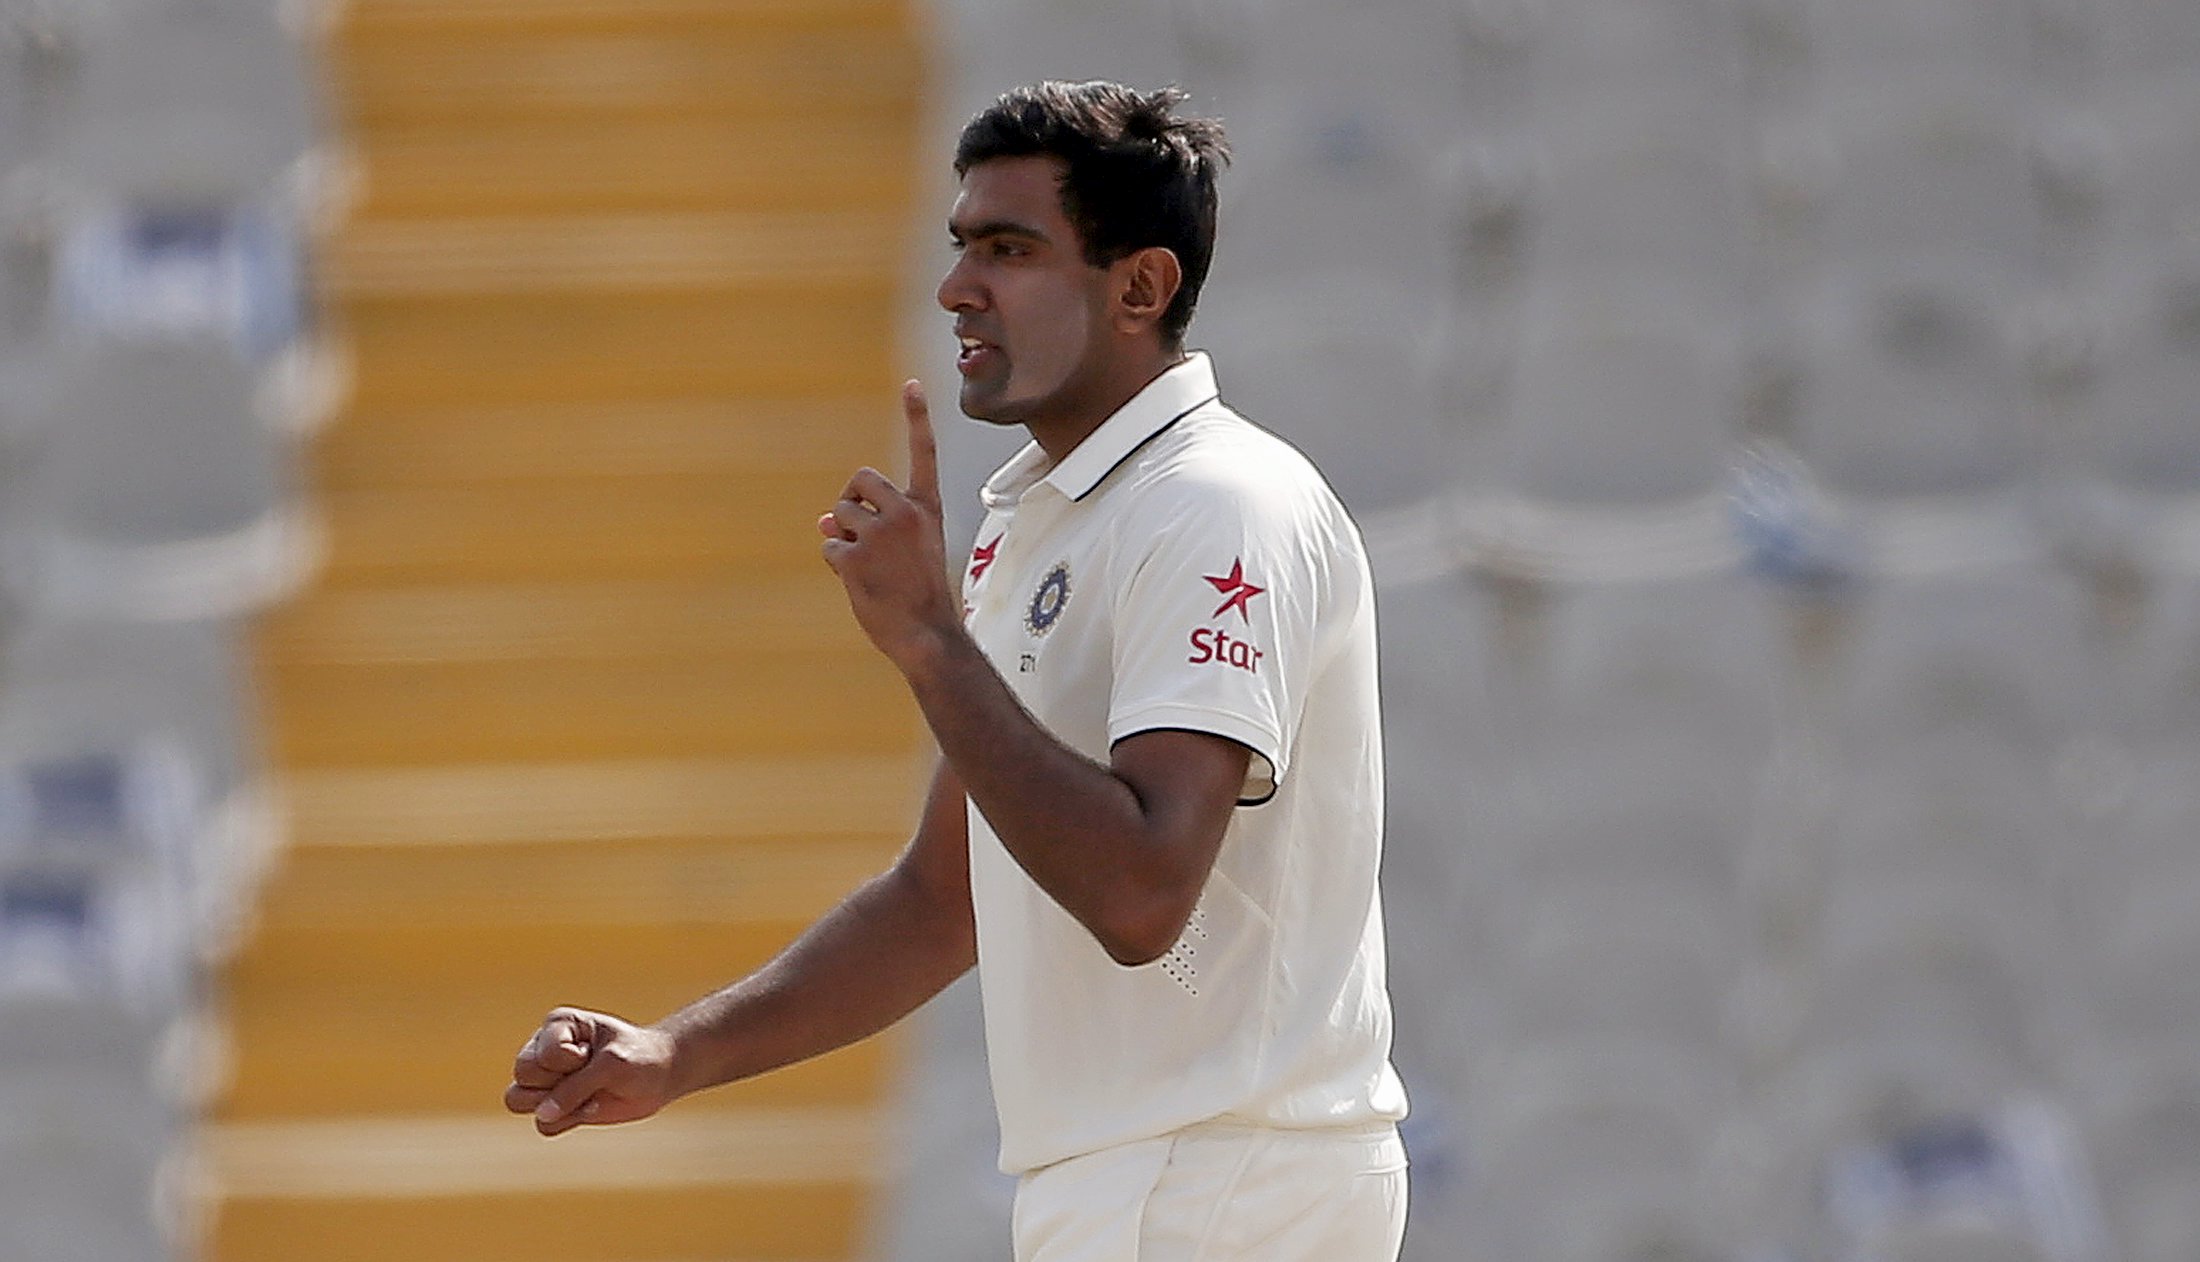 India's Ravichandran Ashwin celebrates after dismissing South Africa's Dean Elgar (not pictured) during the second day of their first cricket test match, in Mohali, India, November 6, 2015. REUTERS/Adnan Abidi